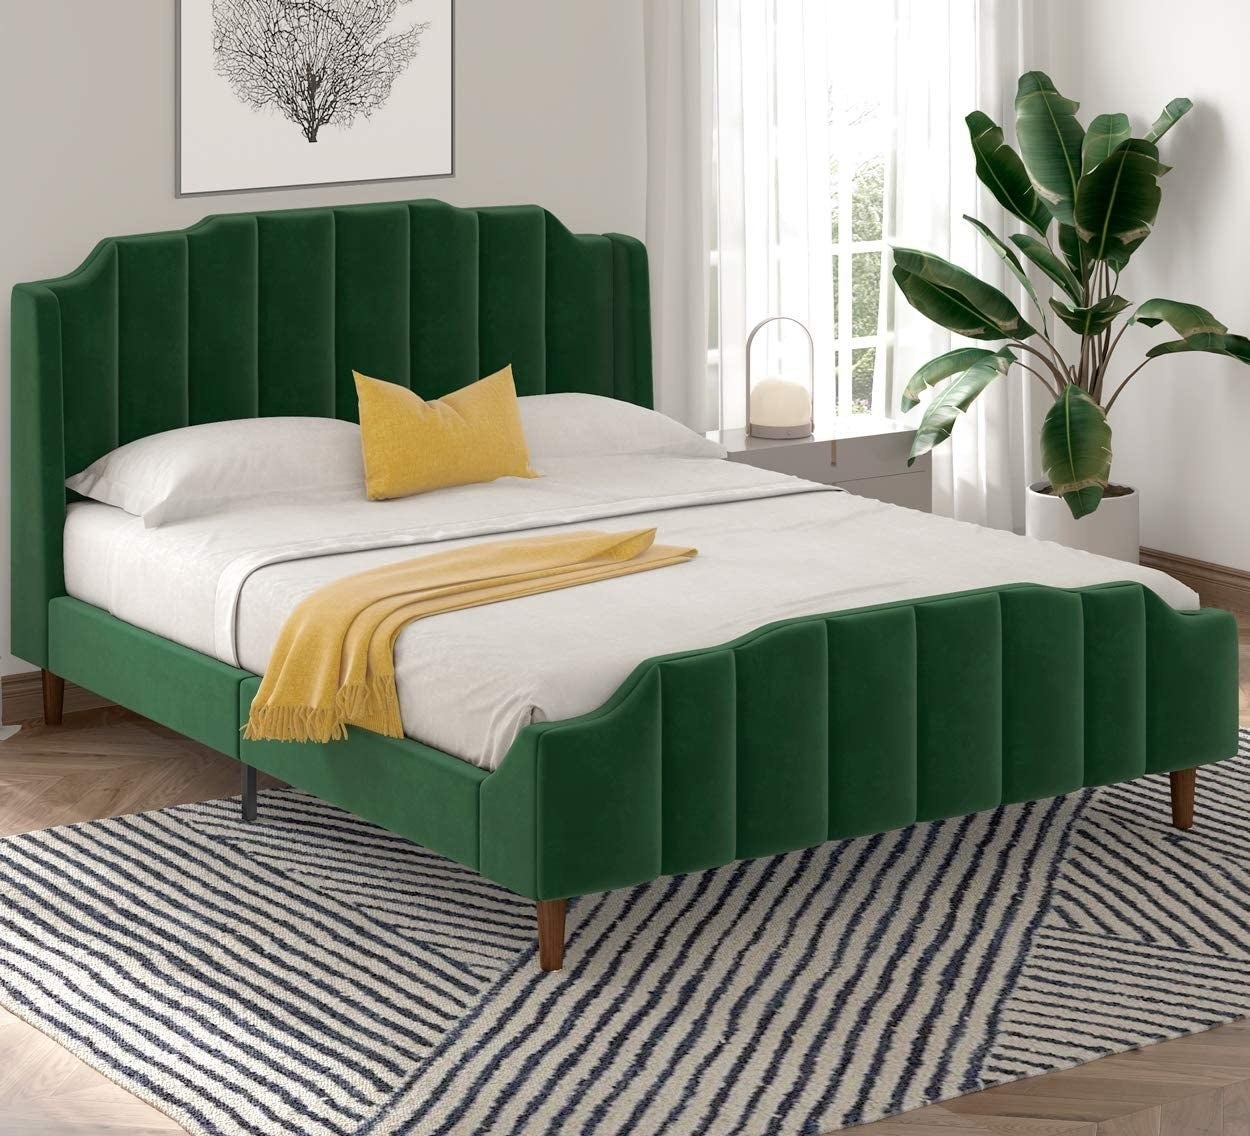 27 Bed Frames That Only Look, Average Cost Of Bed Frame